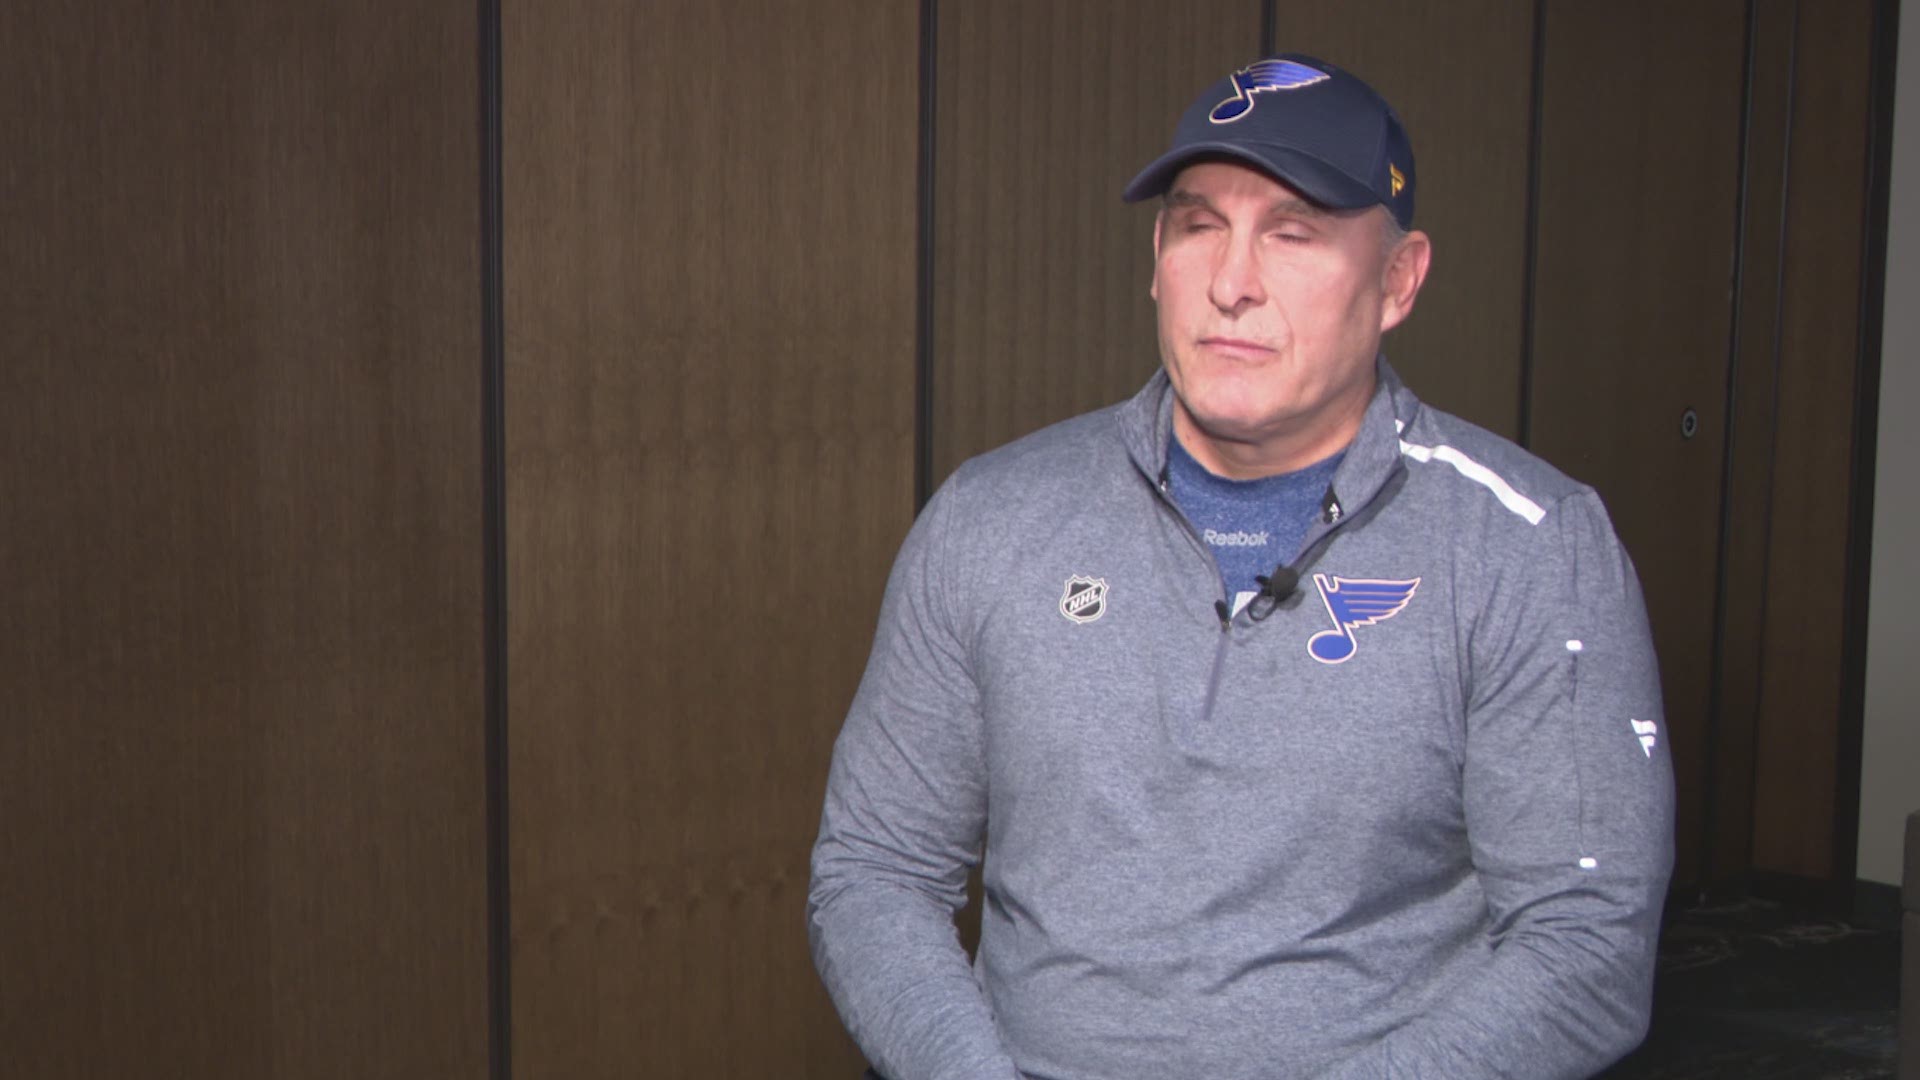 "The Chief" already has a Stanley Cup under his belt with the Blues, but we wanted to get to know him a bit better. Here's a look at the lighter side of Craig Berube